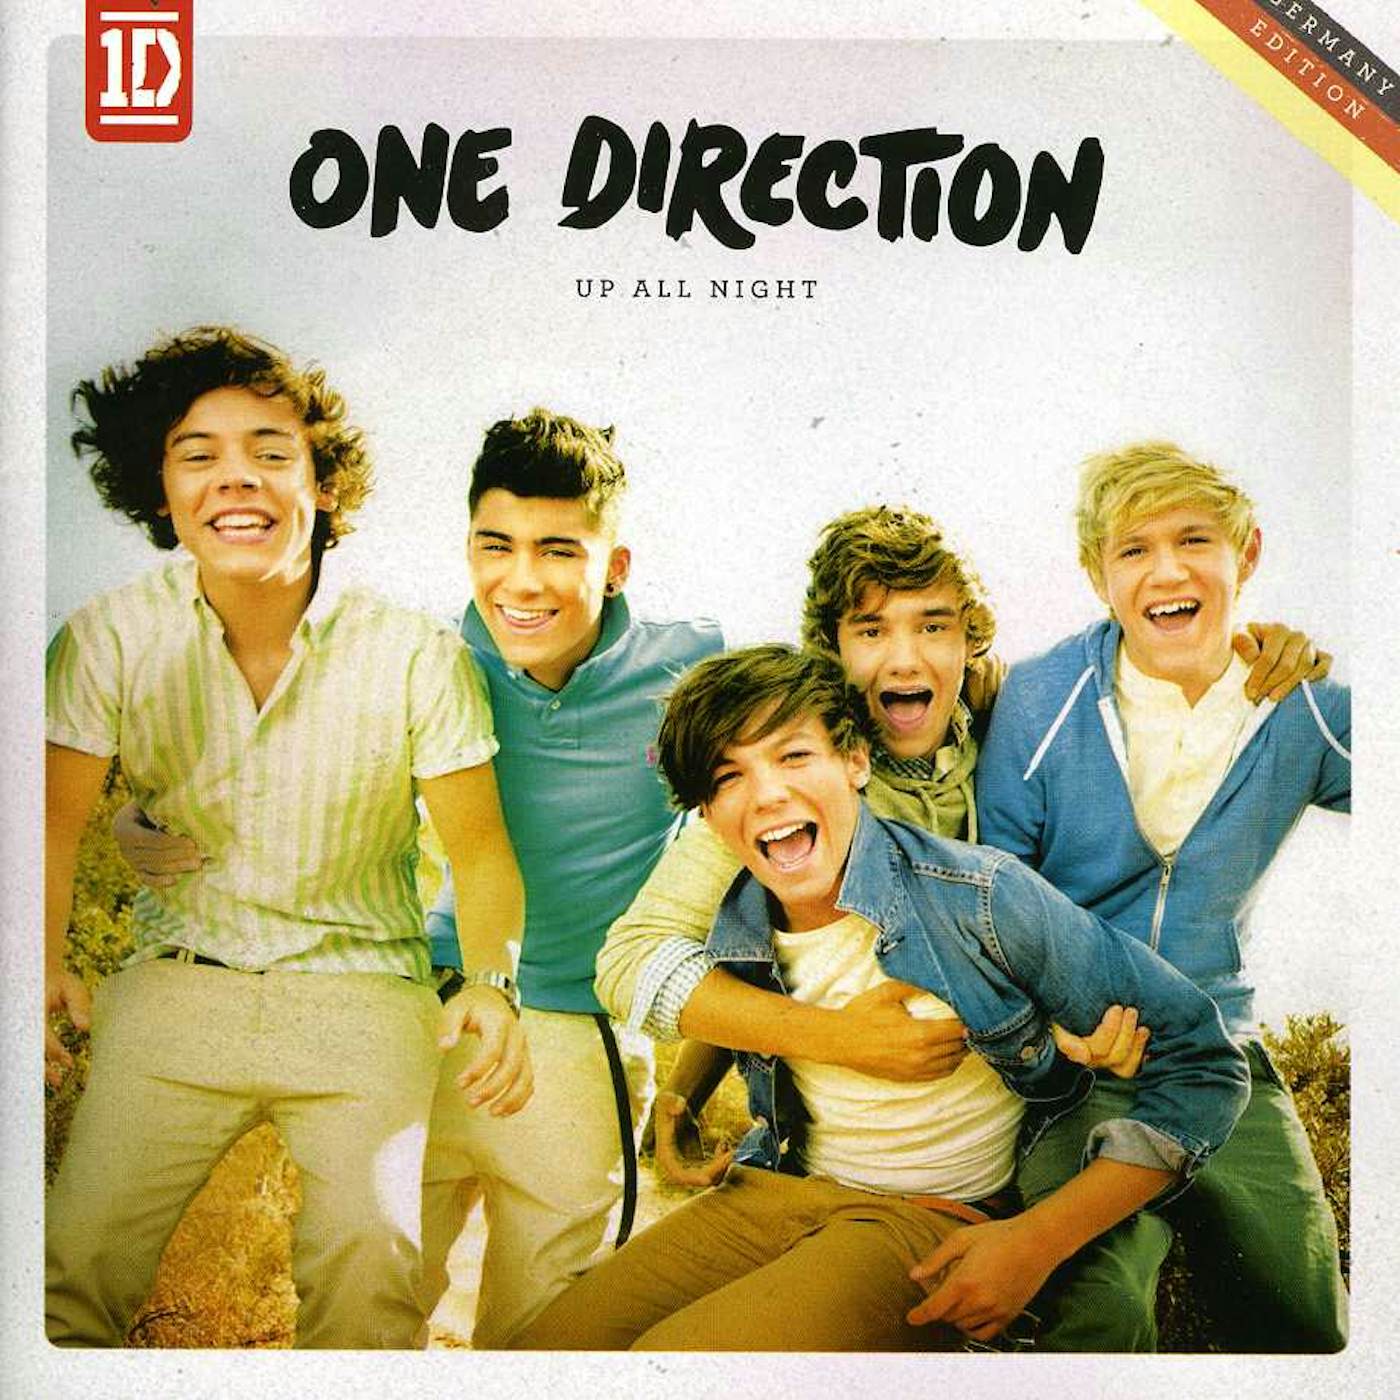 One Direction UP ALL NIGHT (GERMAN EDITION 16 TRACKS) CD